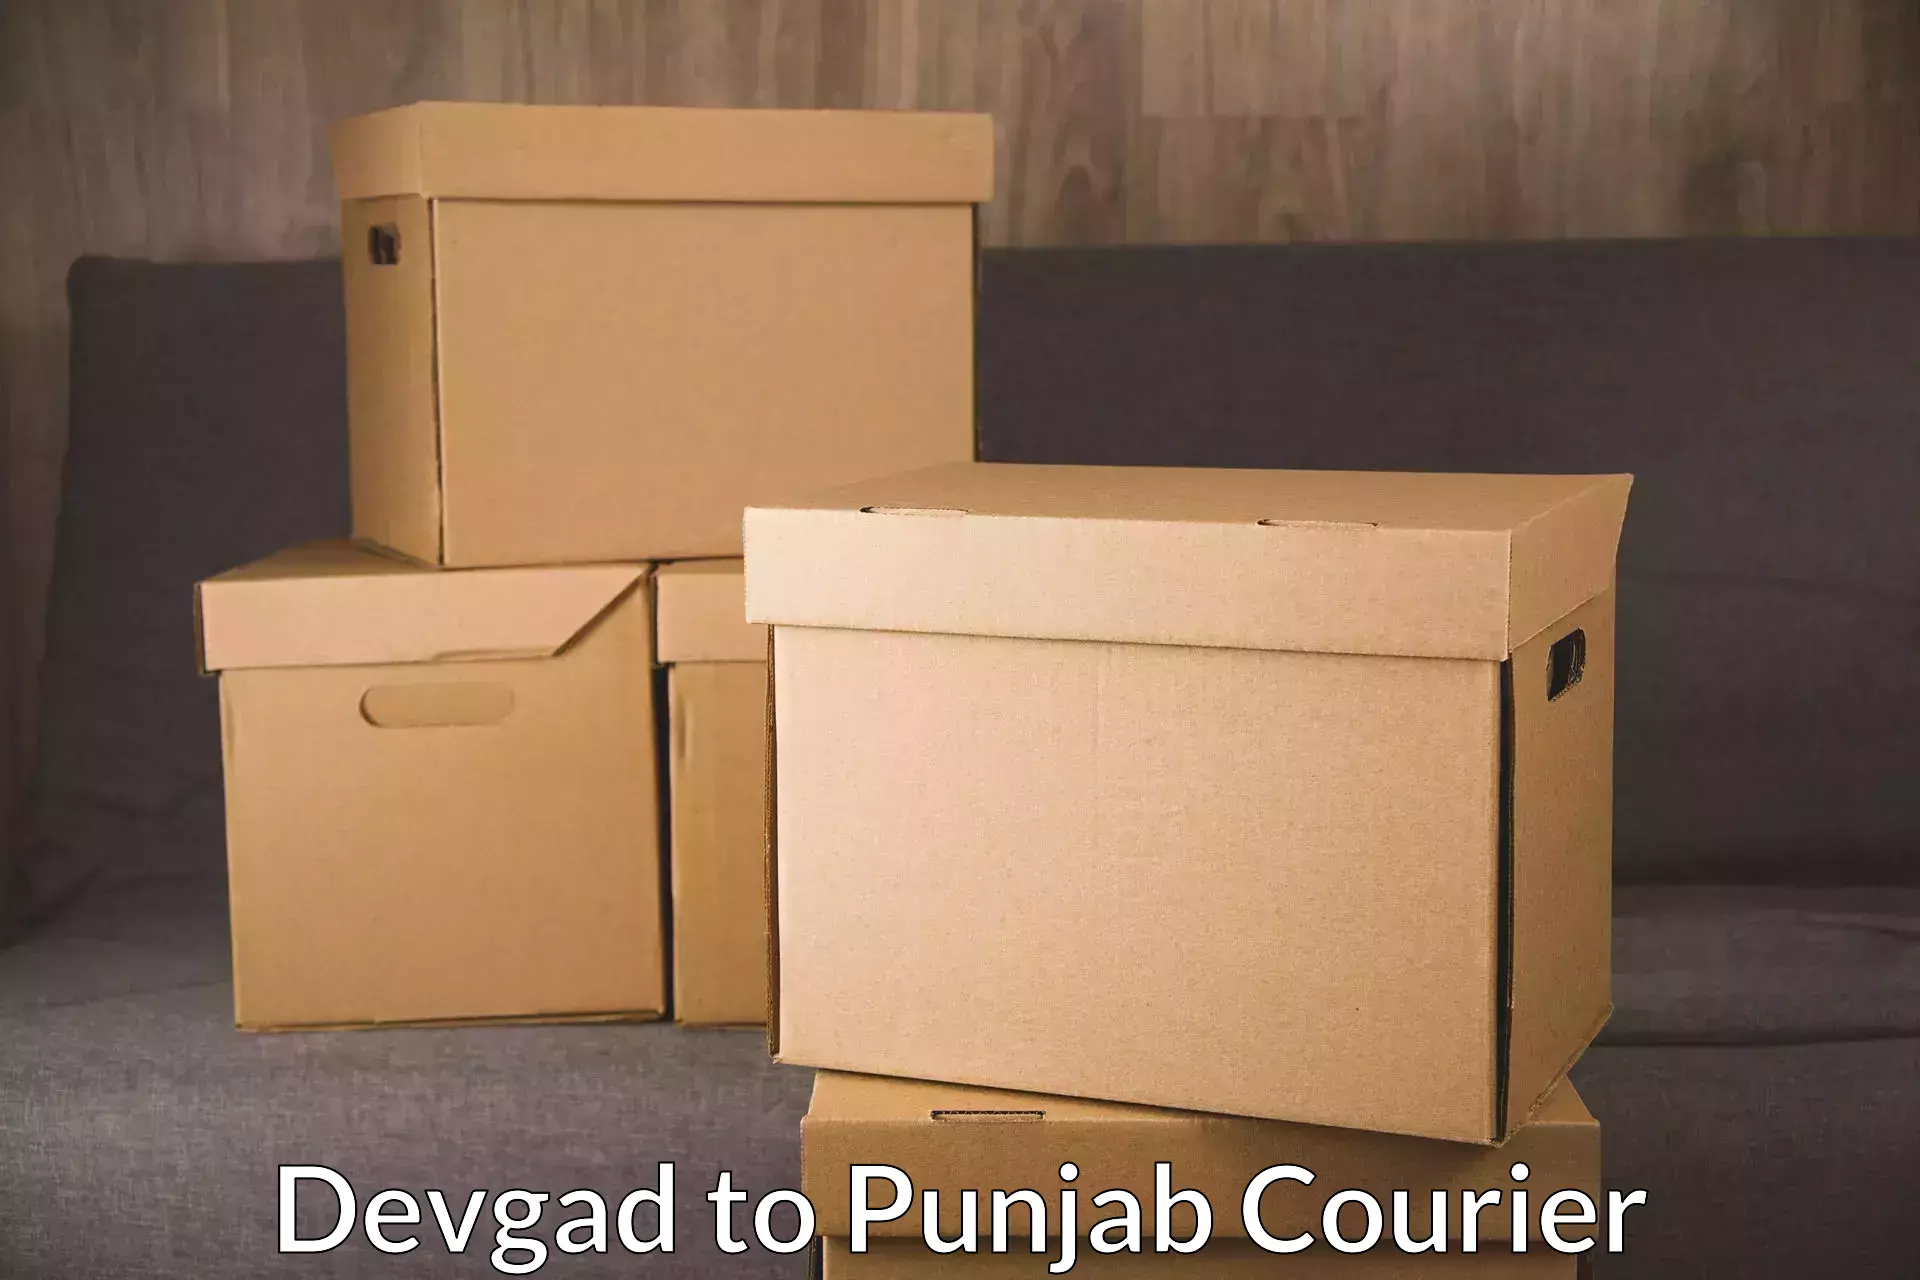 Full-service courier options Devgad to Mohali